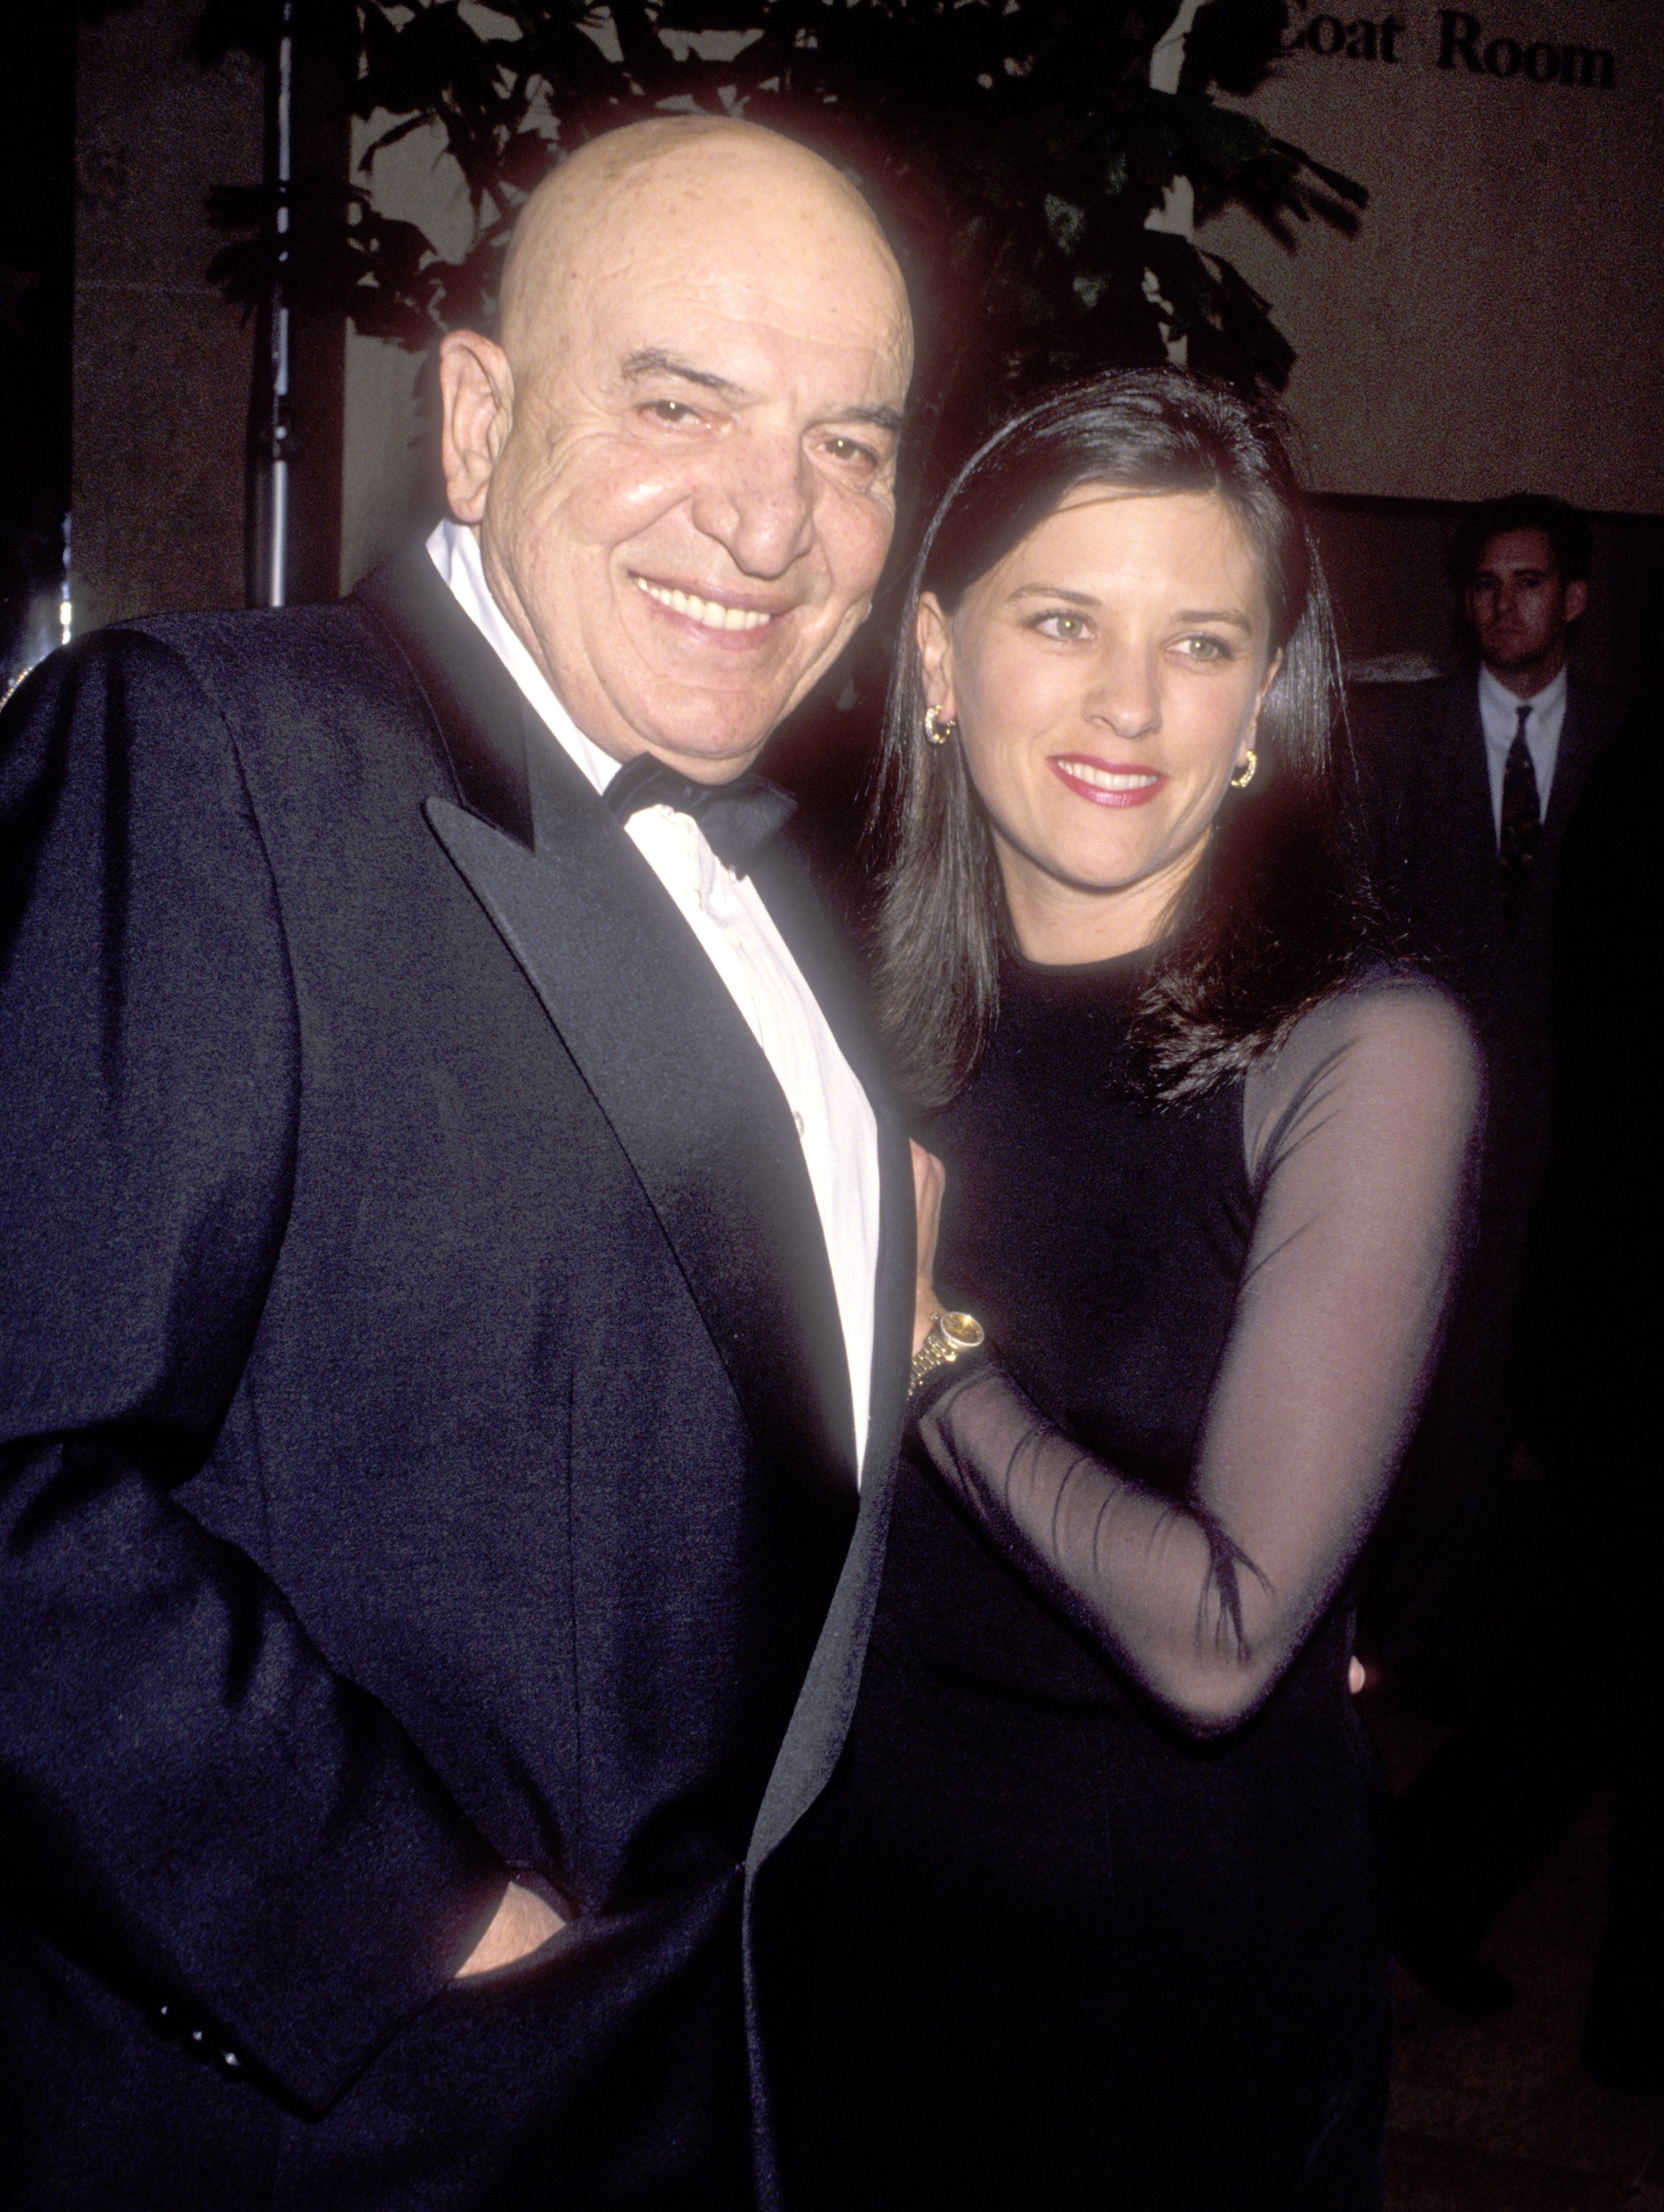  Actor Telly Savalas and wife Julie Savalas attend the 21st Annual American Film Institute Lifetime Achievement Award Salute on March 10, 1993 at Beverly Hilton Hotel in Beverly Hills, California. | Source: Getty Images